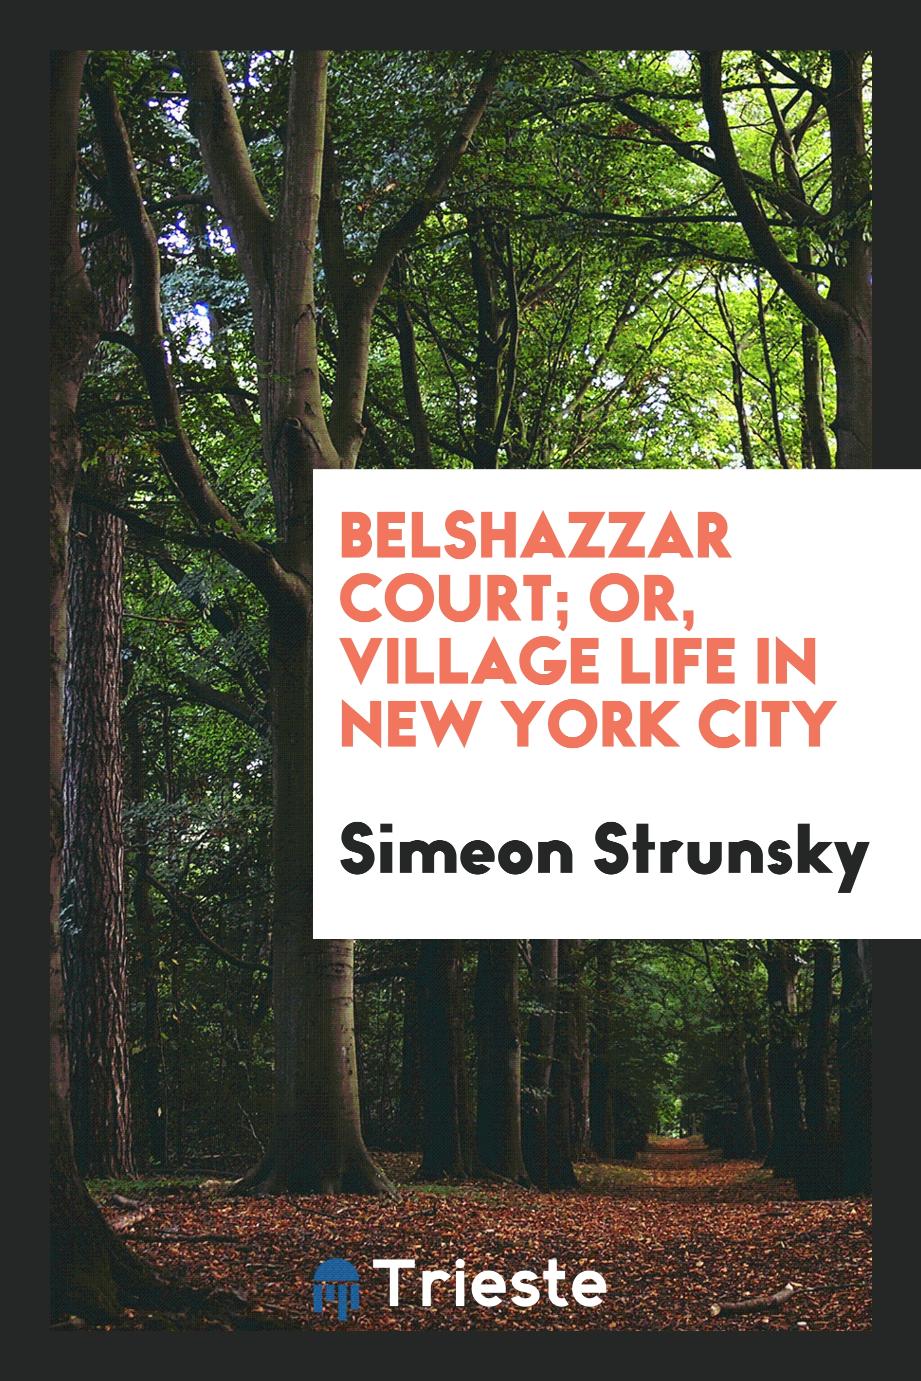 Belshazzar court; or, Village life in New York city